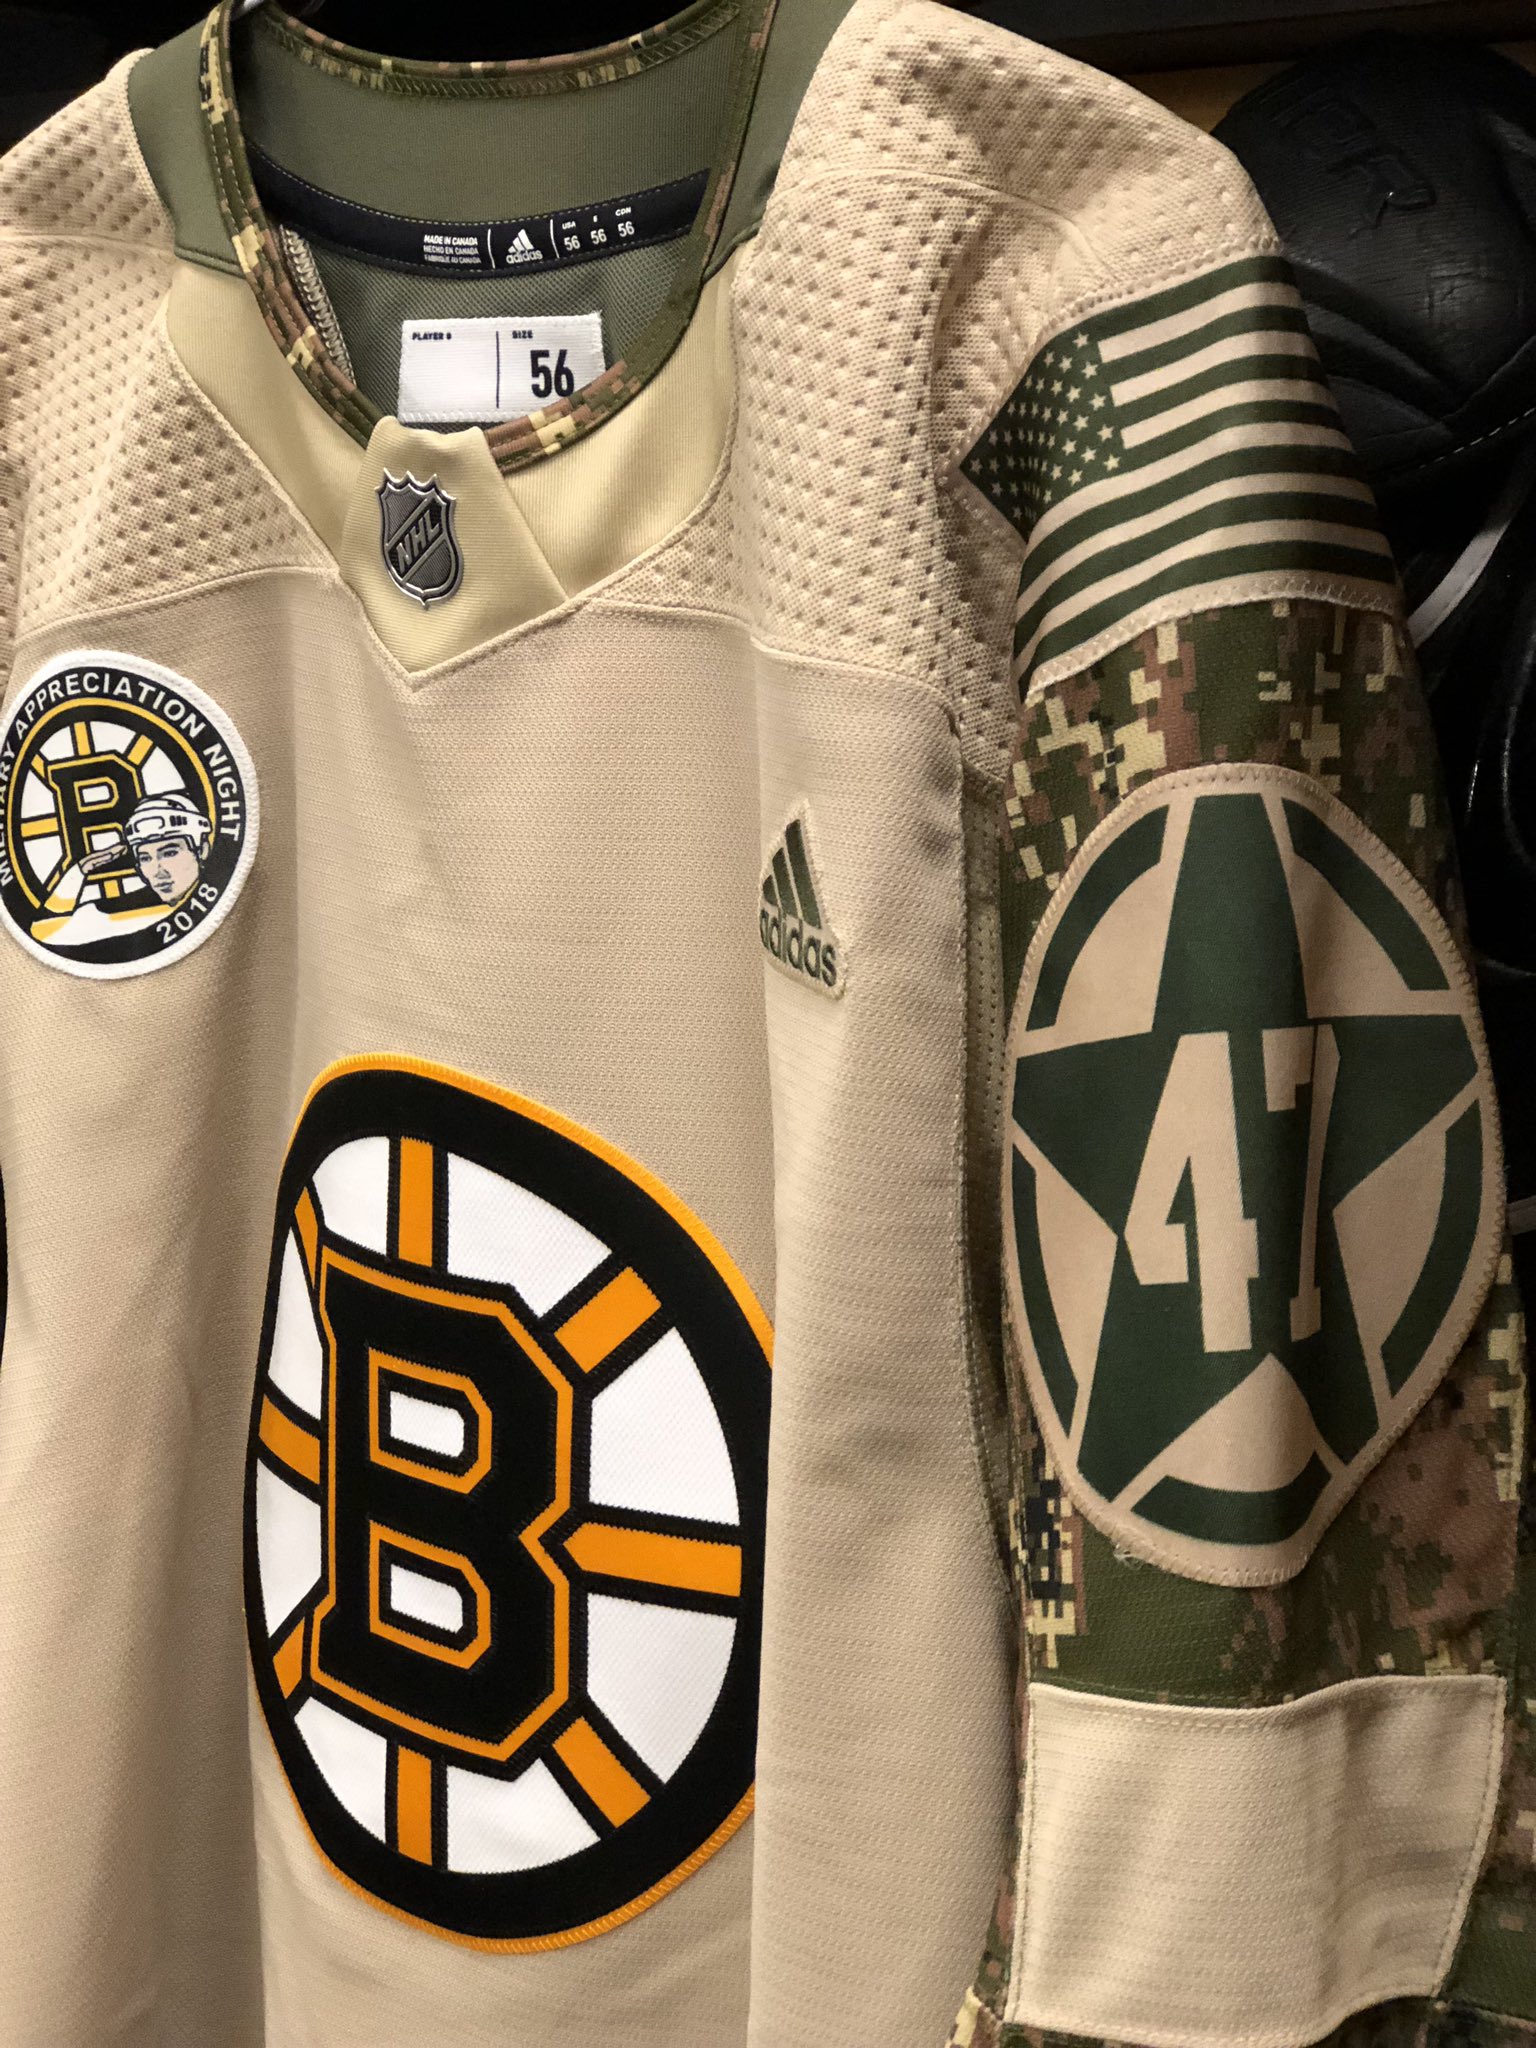 Pens to Wear Camo Warmup Jerseys As Part of Veterans Day Celebration